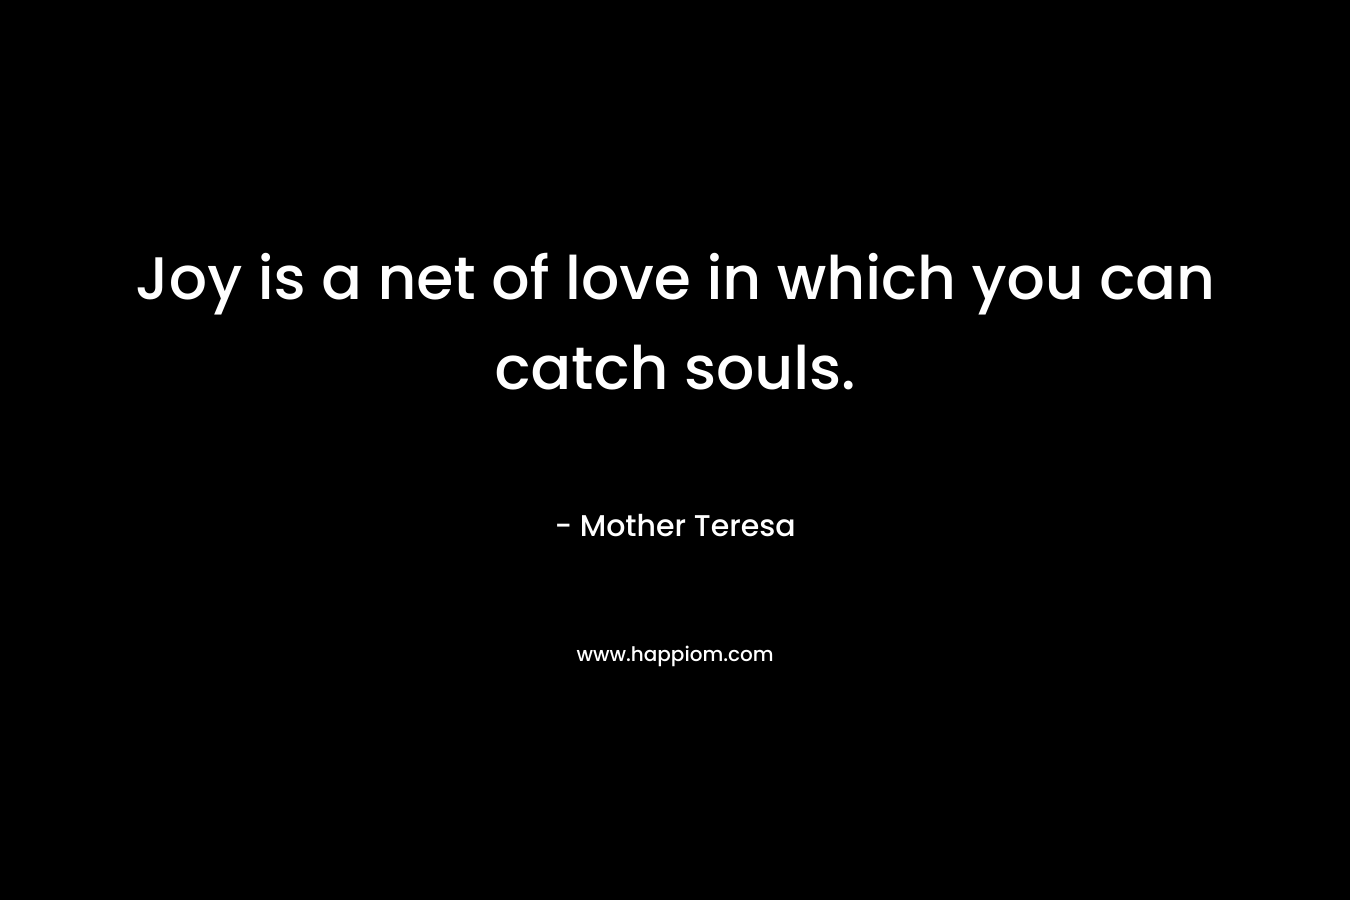 Joy is a net of love in which you can catch souls. – Mother Teresa